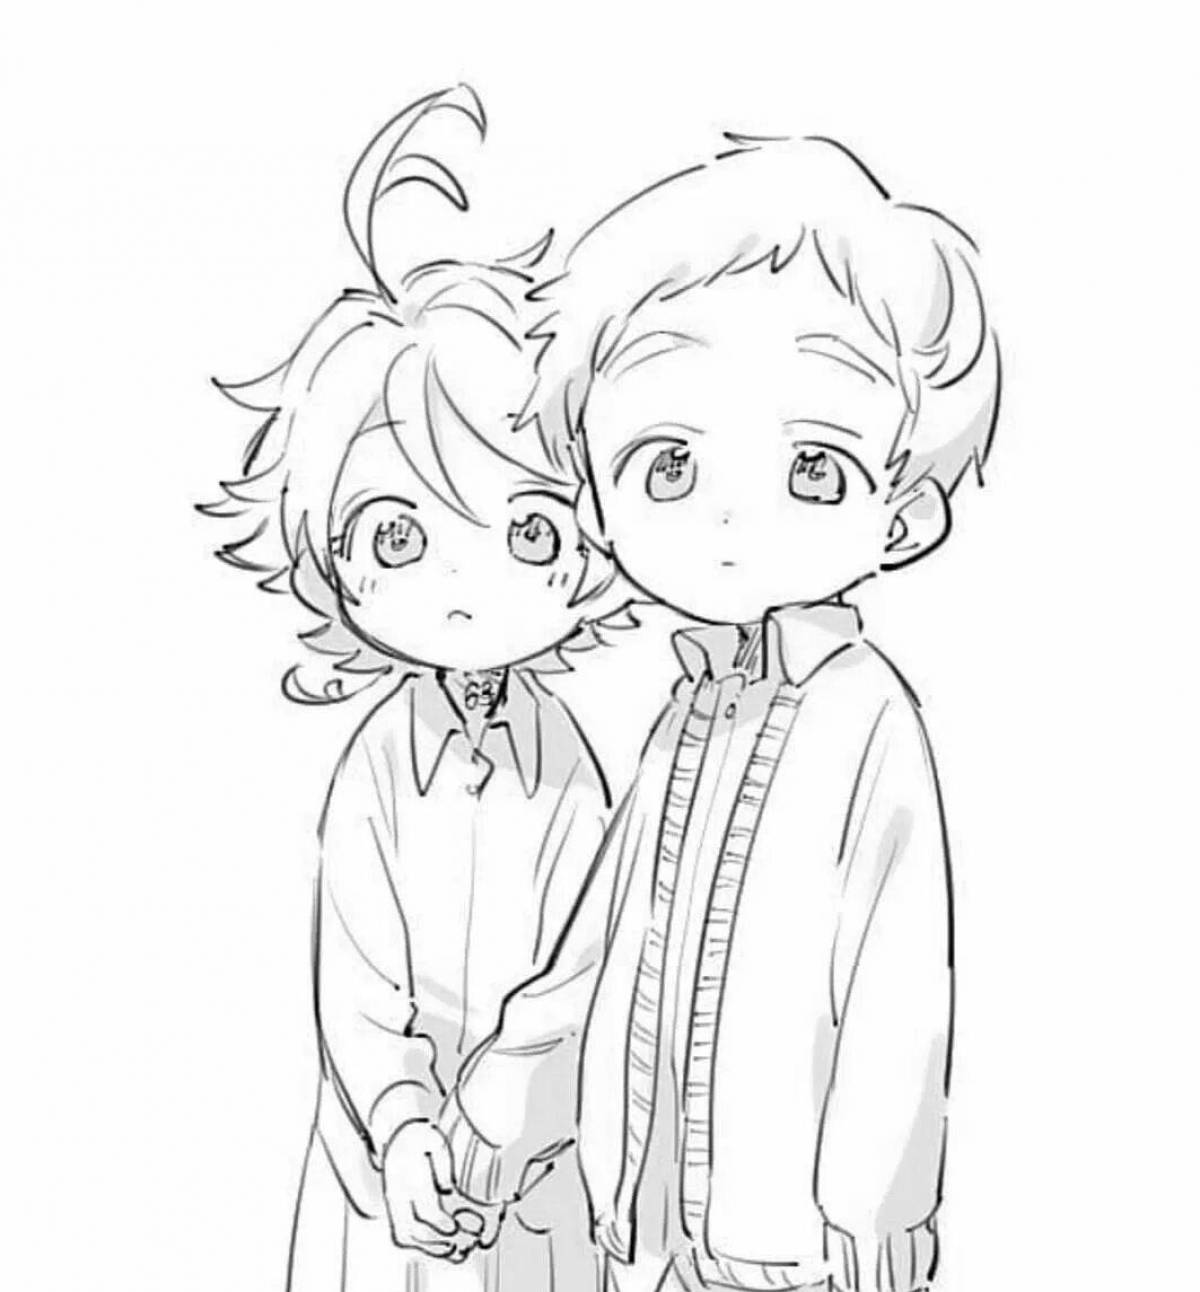 Smite the Promised Neverland anime coloring book